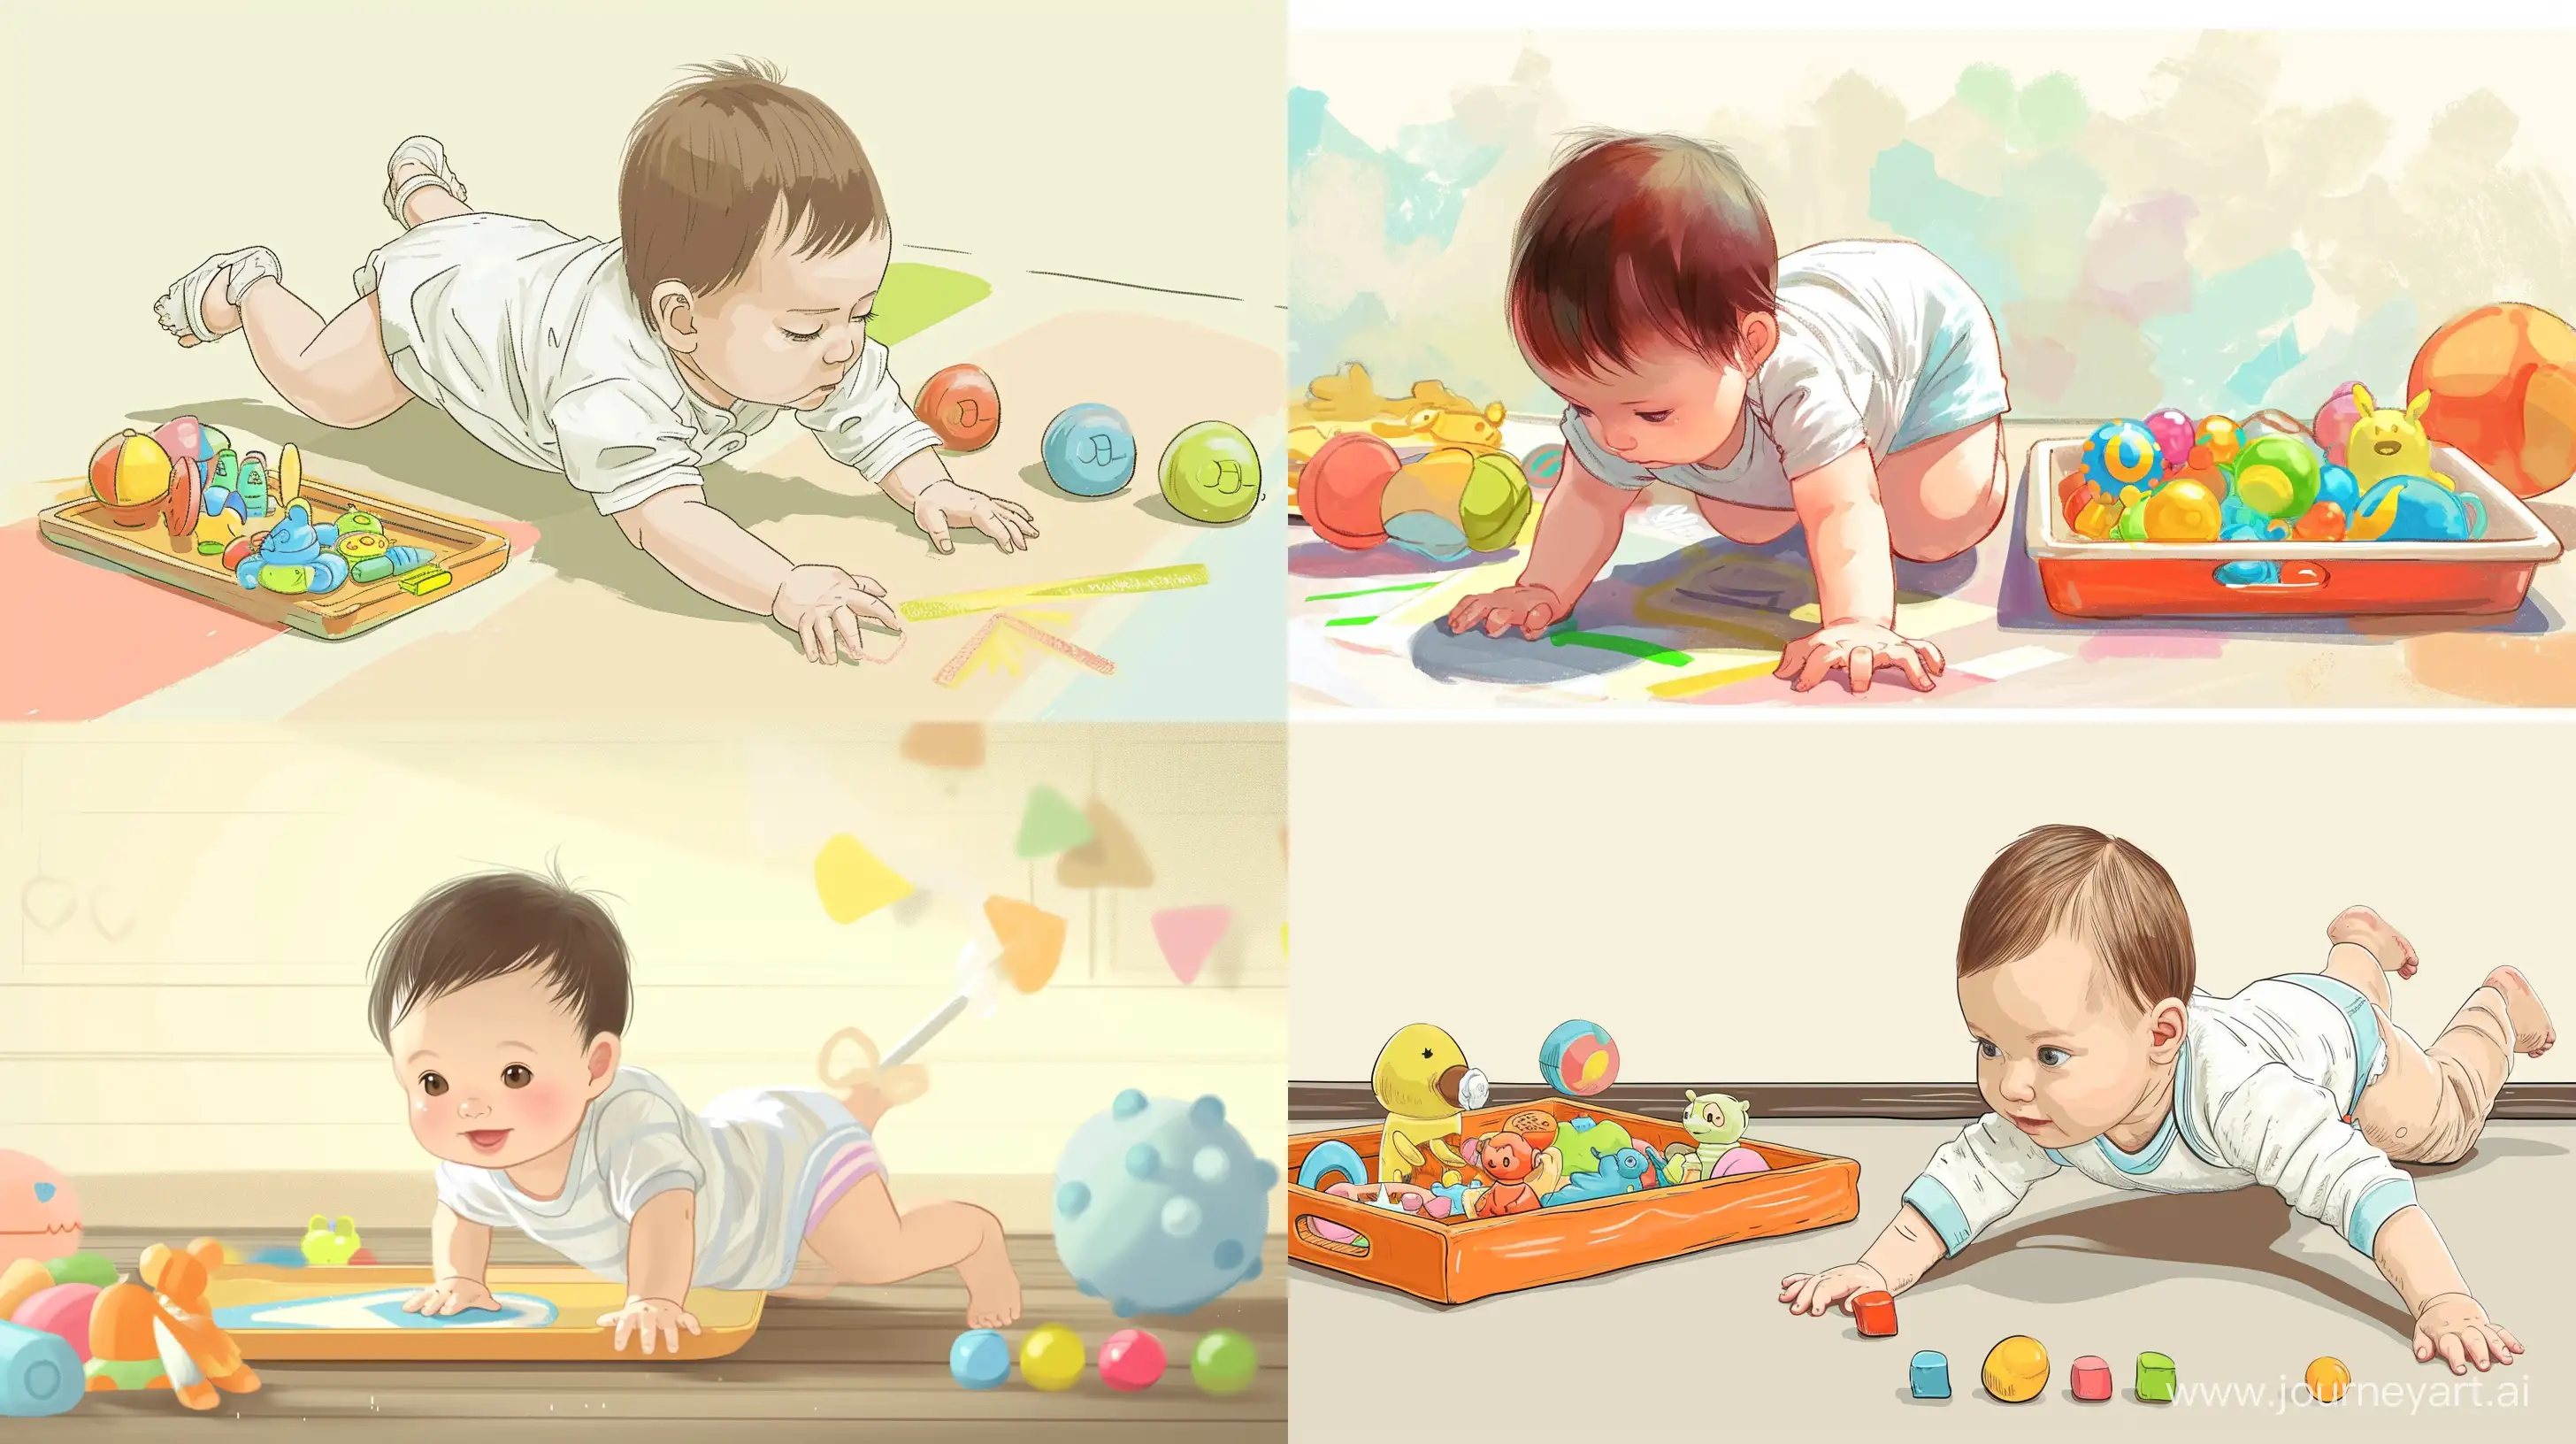 Adorable-Anime-Baby-Explores-Toys-with-Chalk-in-Hand